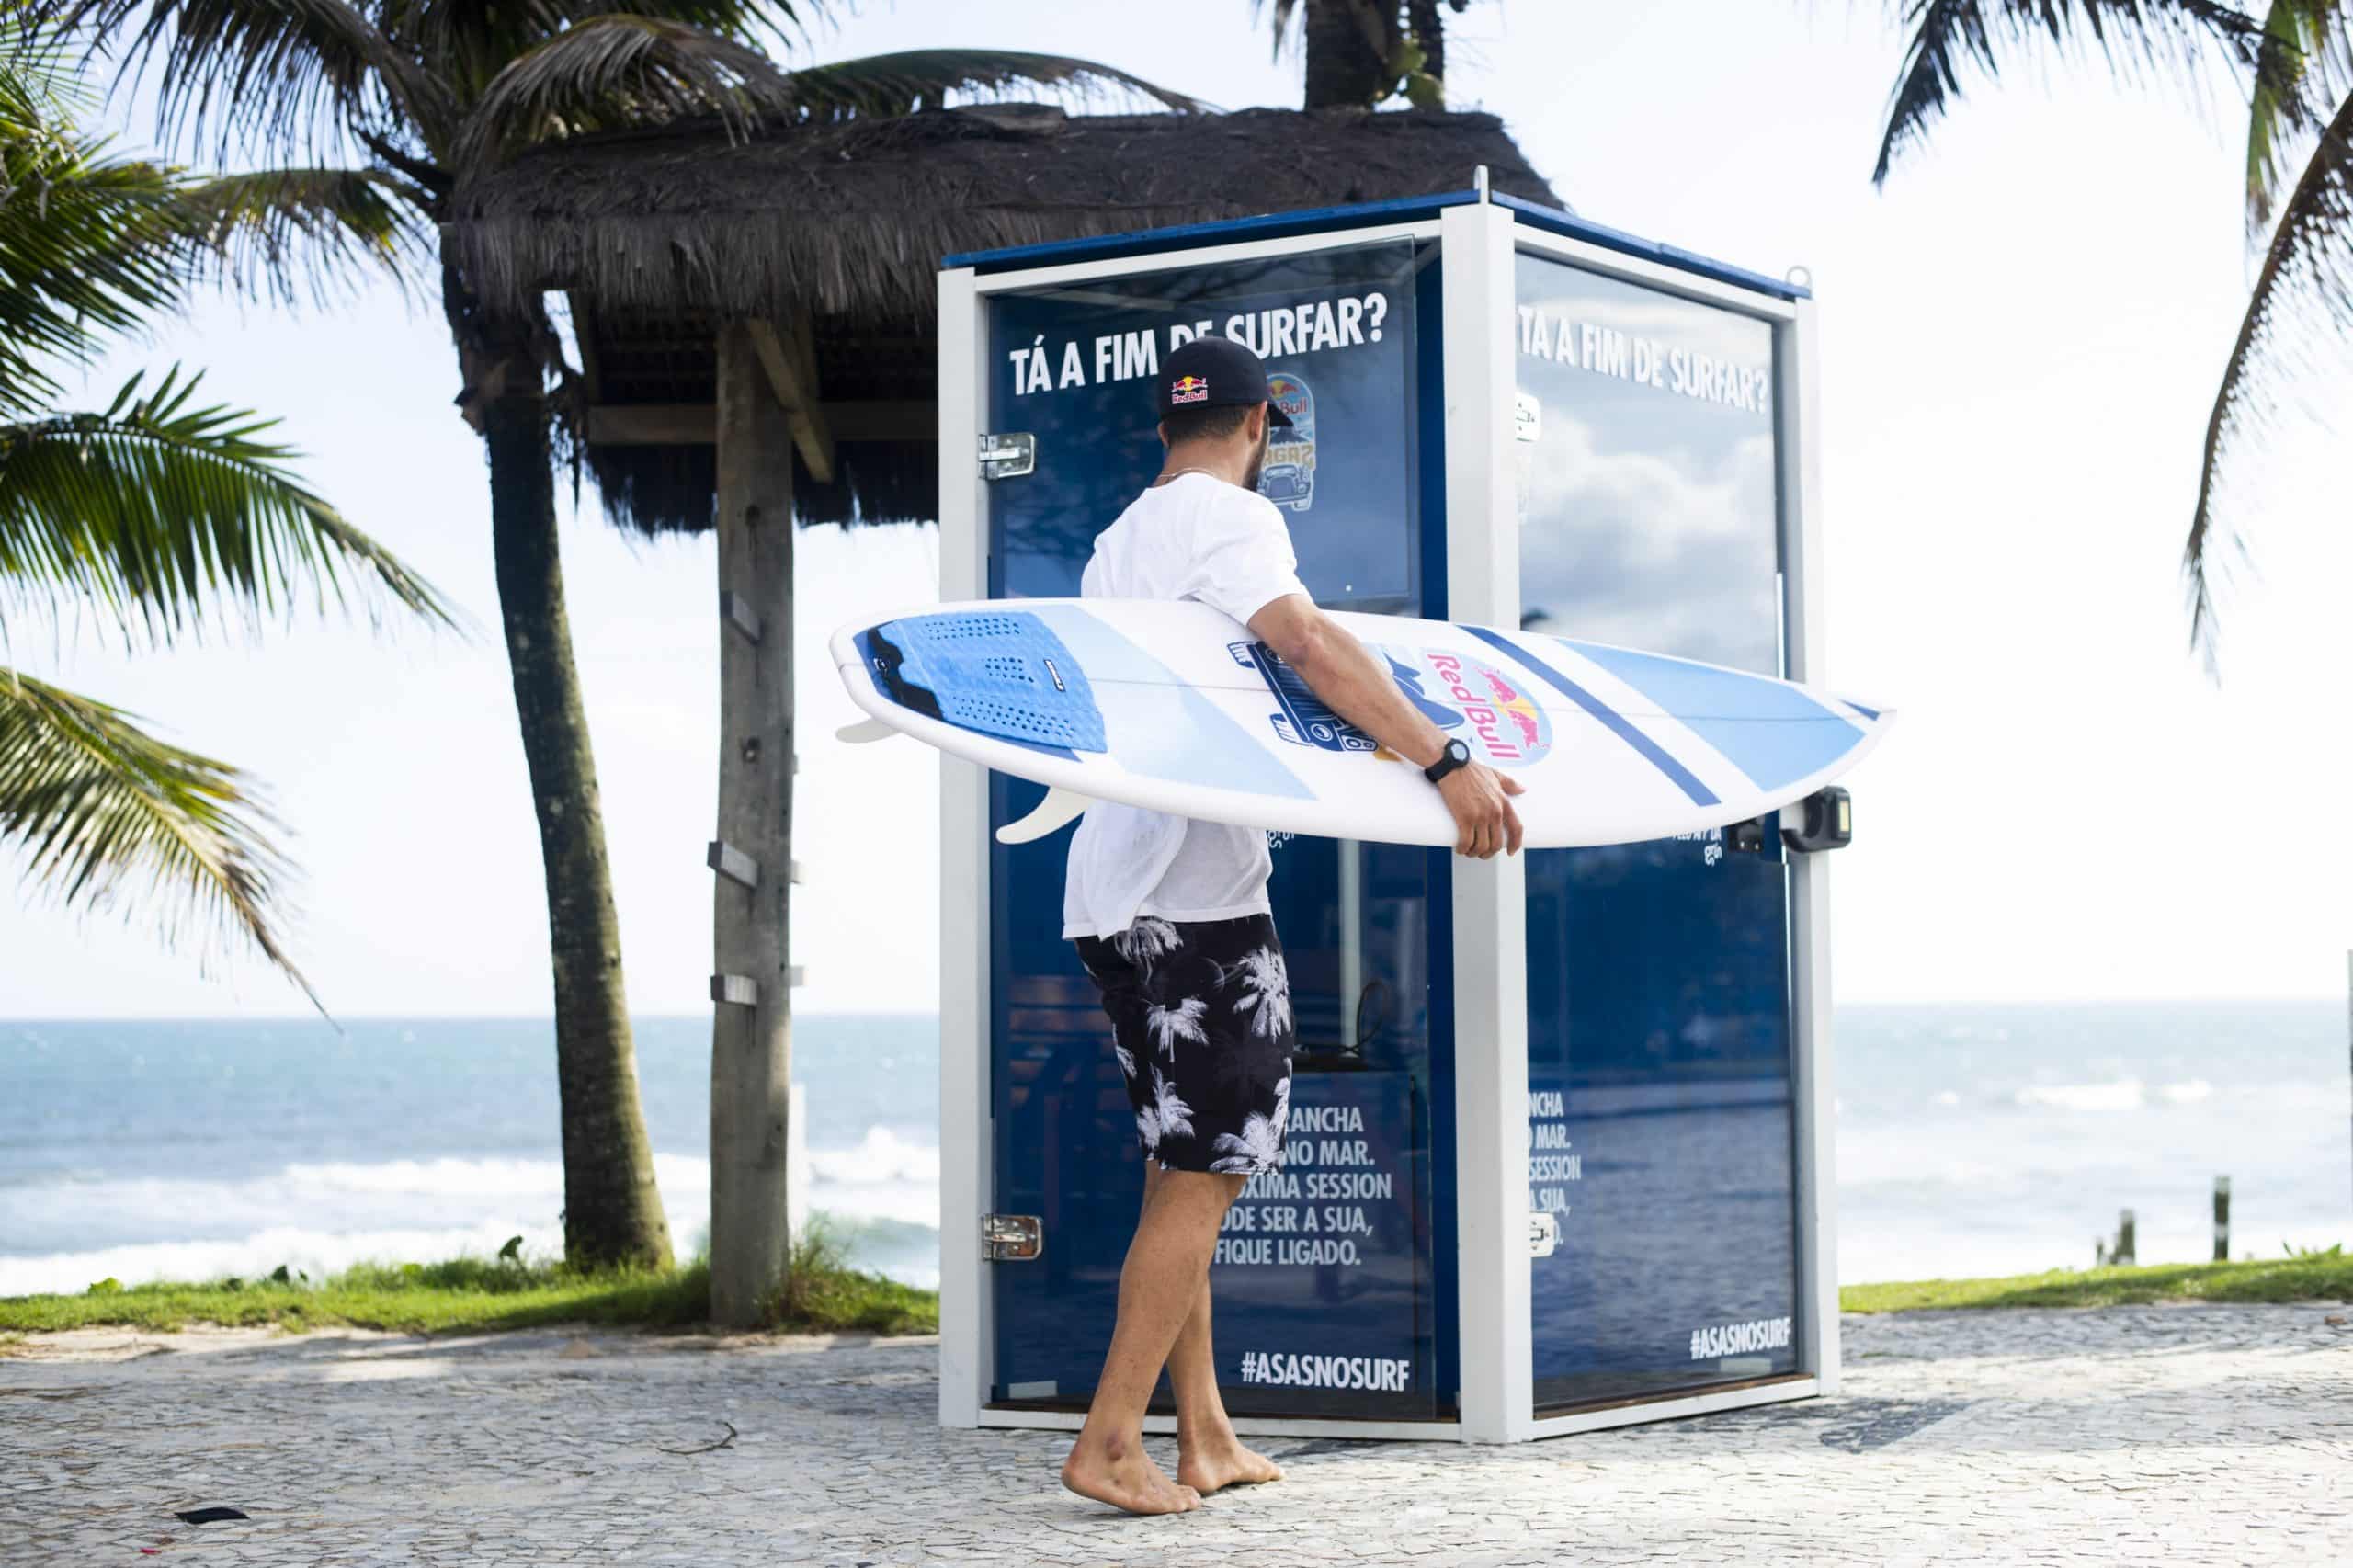 Bull launches world's first surfboard sharing service in Rio - Surfd